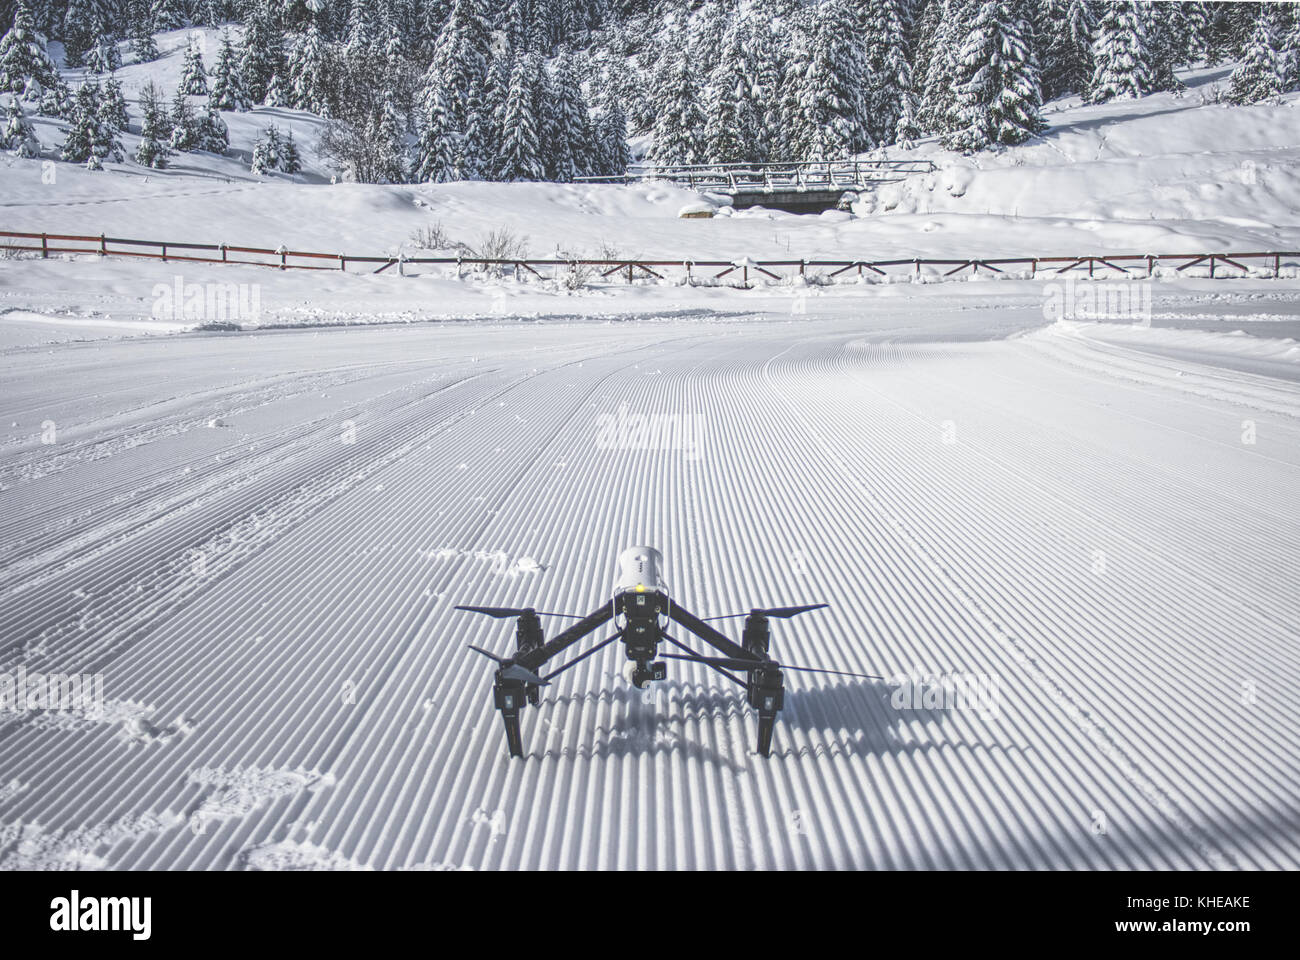 DJI Inspire 1 Drone powered on and ready to take flight in the snowy mountains of Bulgaria Stock Photo